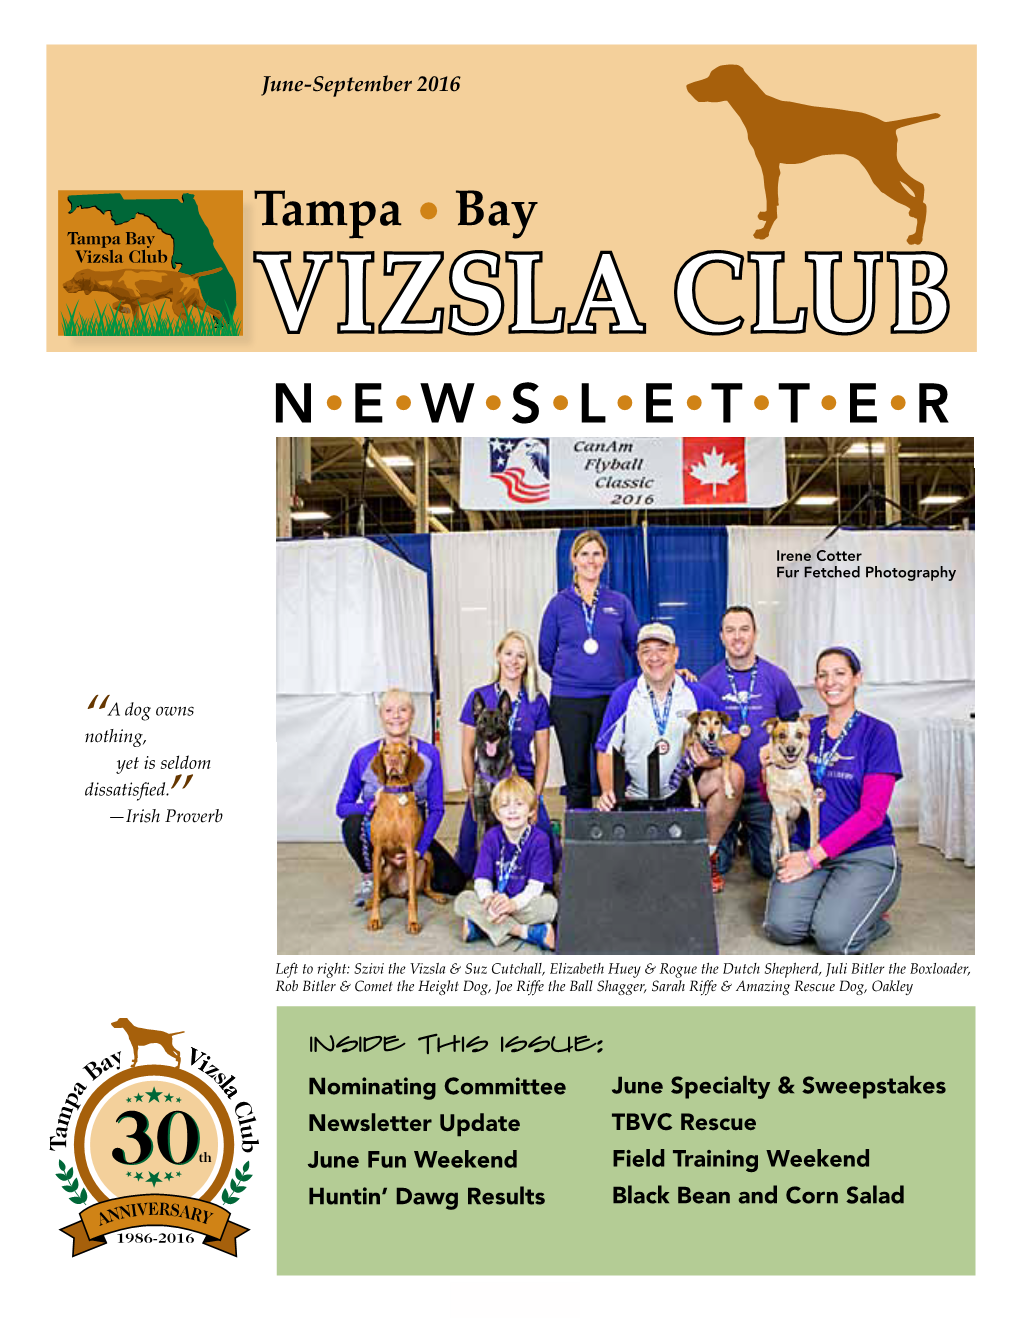 The Tampa Bay Vizsla Club for the Period of January 1, 2017 to December 31, 2017